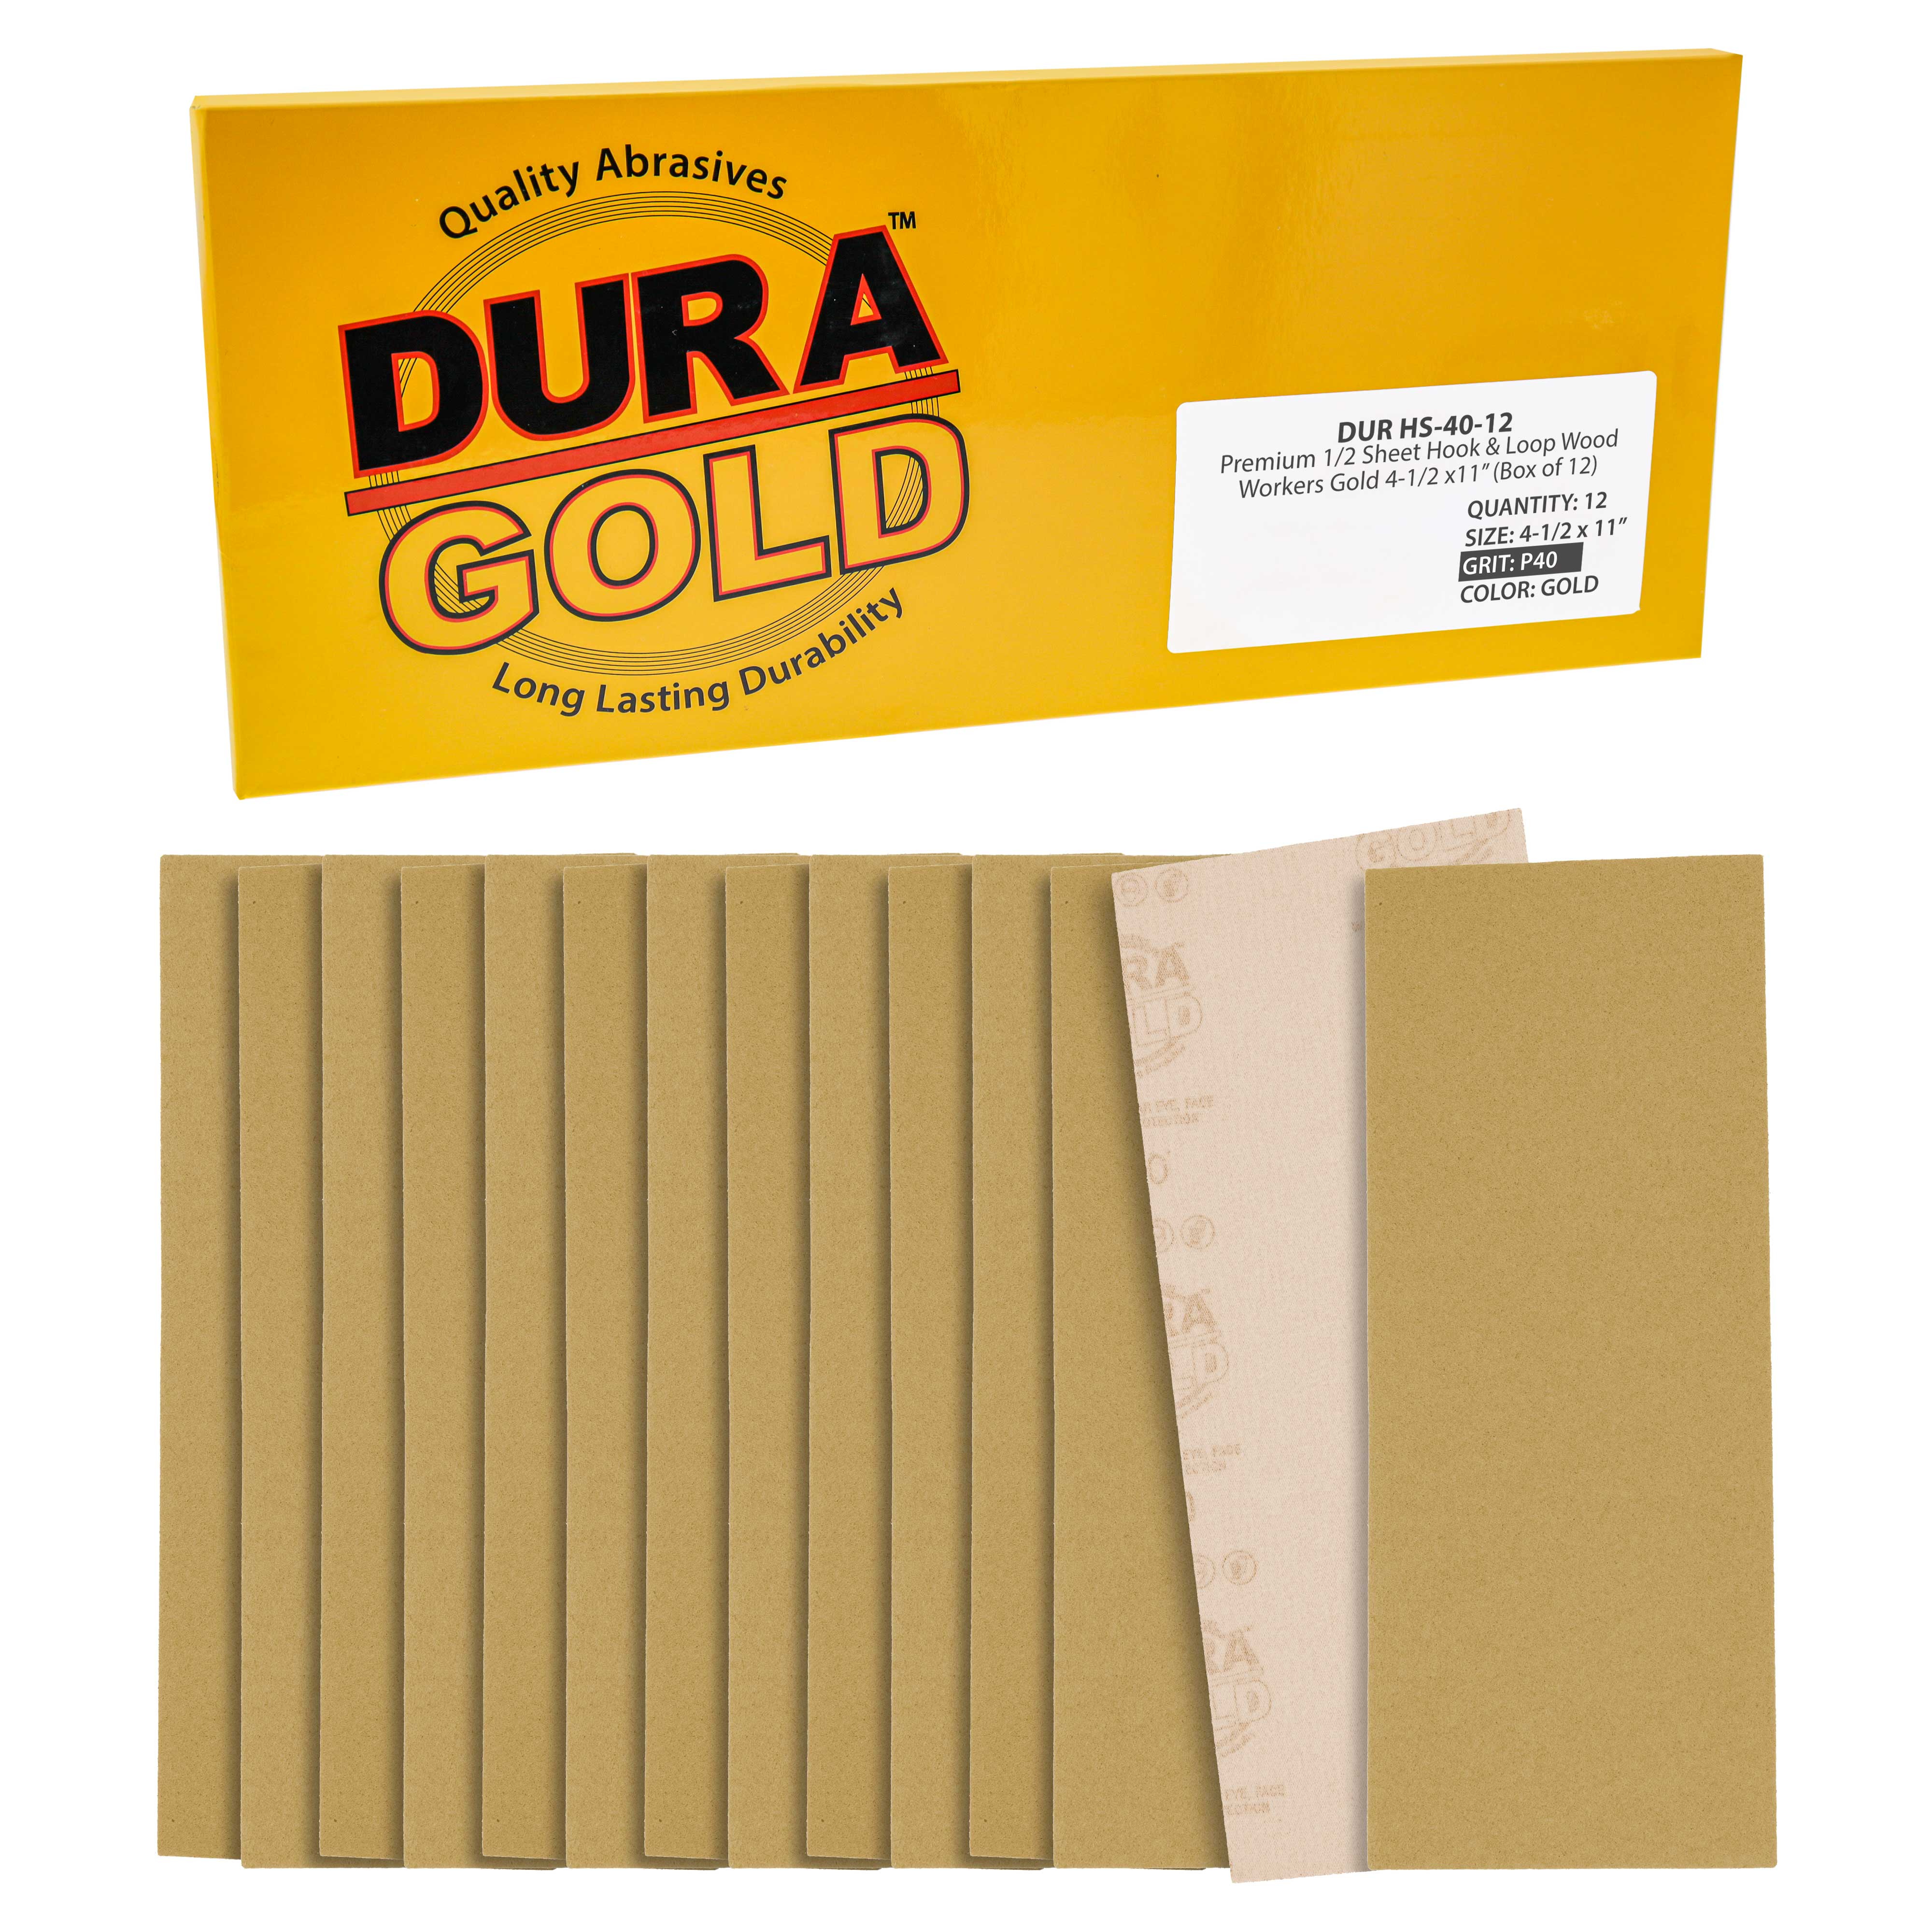 40 Grit - 1/2 Sheet Size Wood Workers Gold, 4-1/2